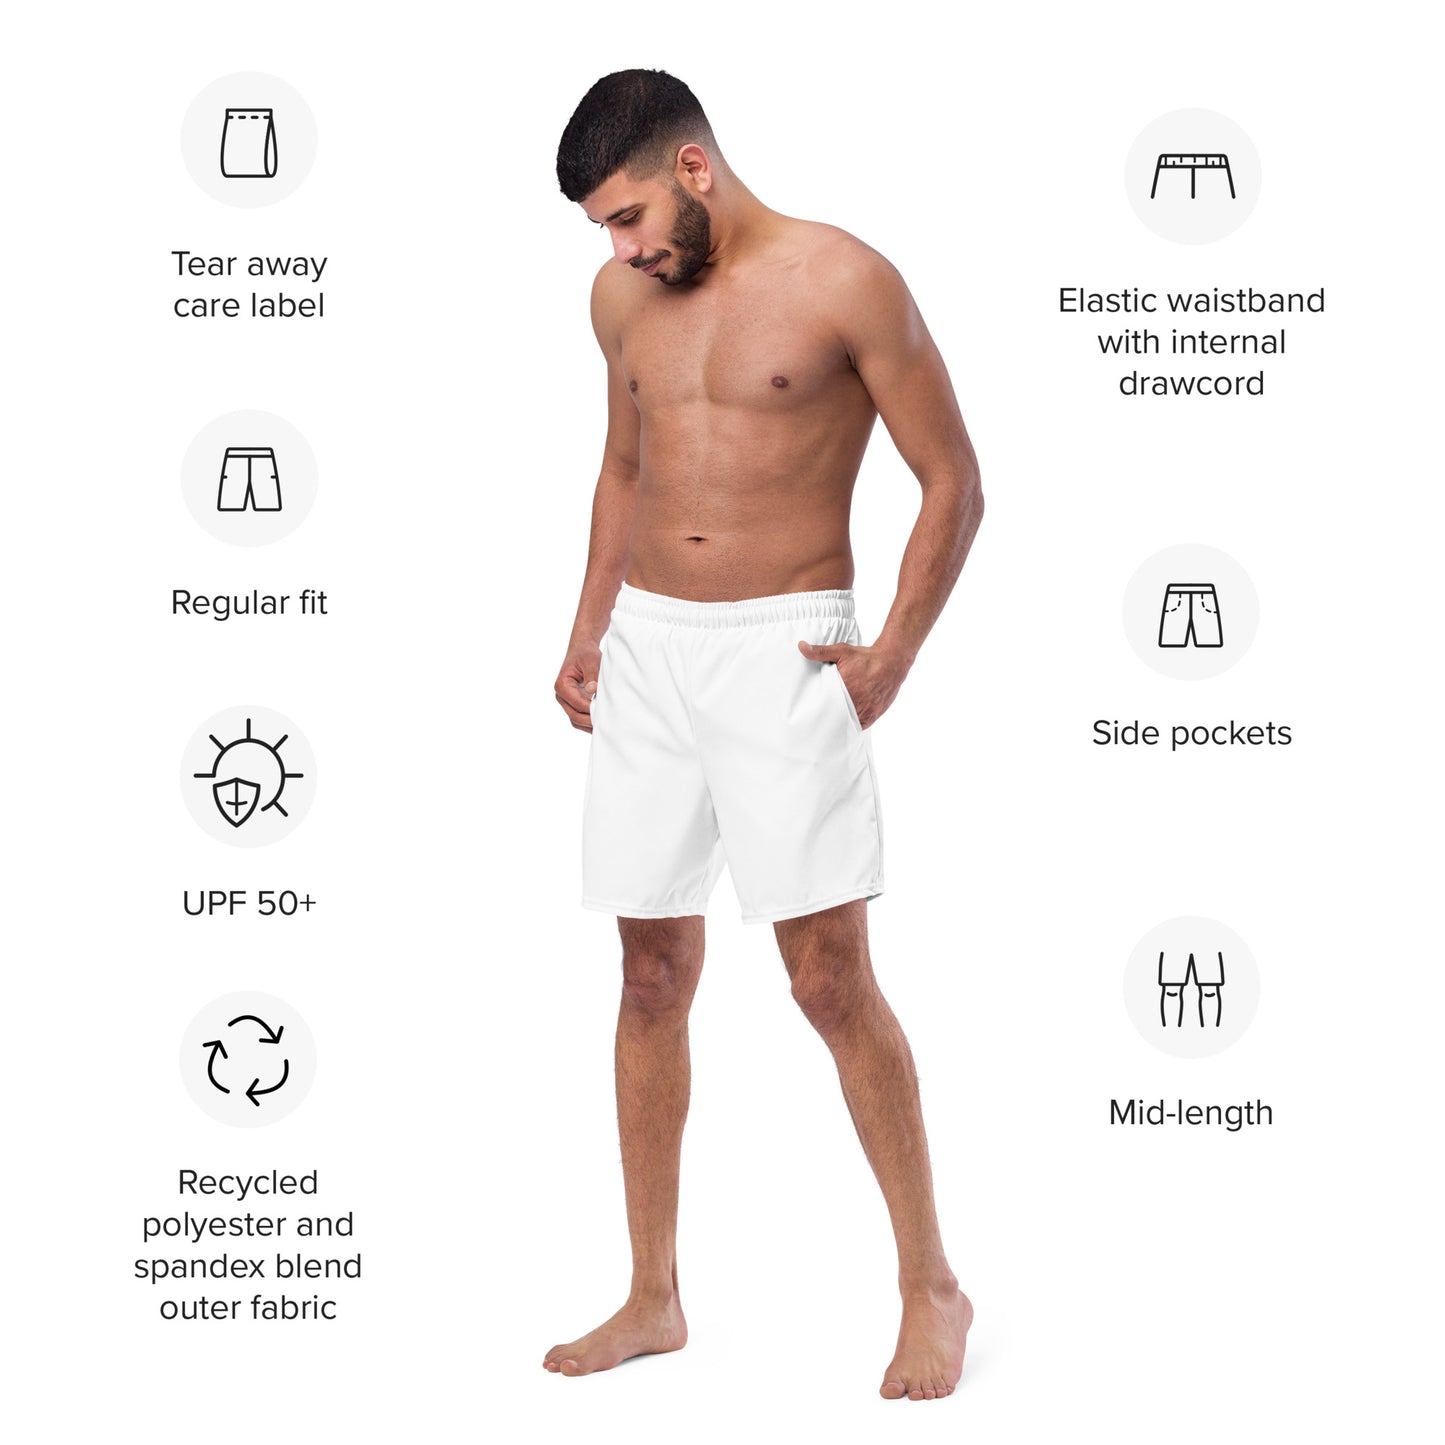 Unleash Your Summer Spirit with BWET's 'Pure Paradise' - The Ultimate White Swim Shorts for the Stylish Beach Adventurer!